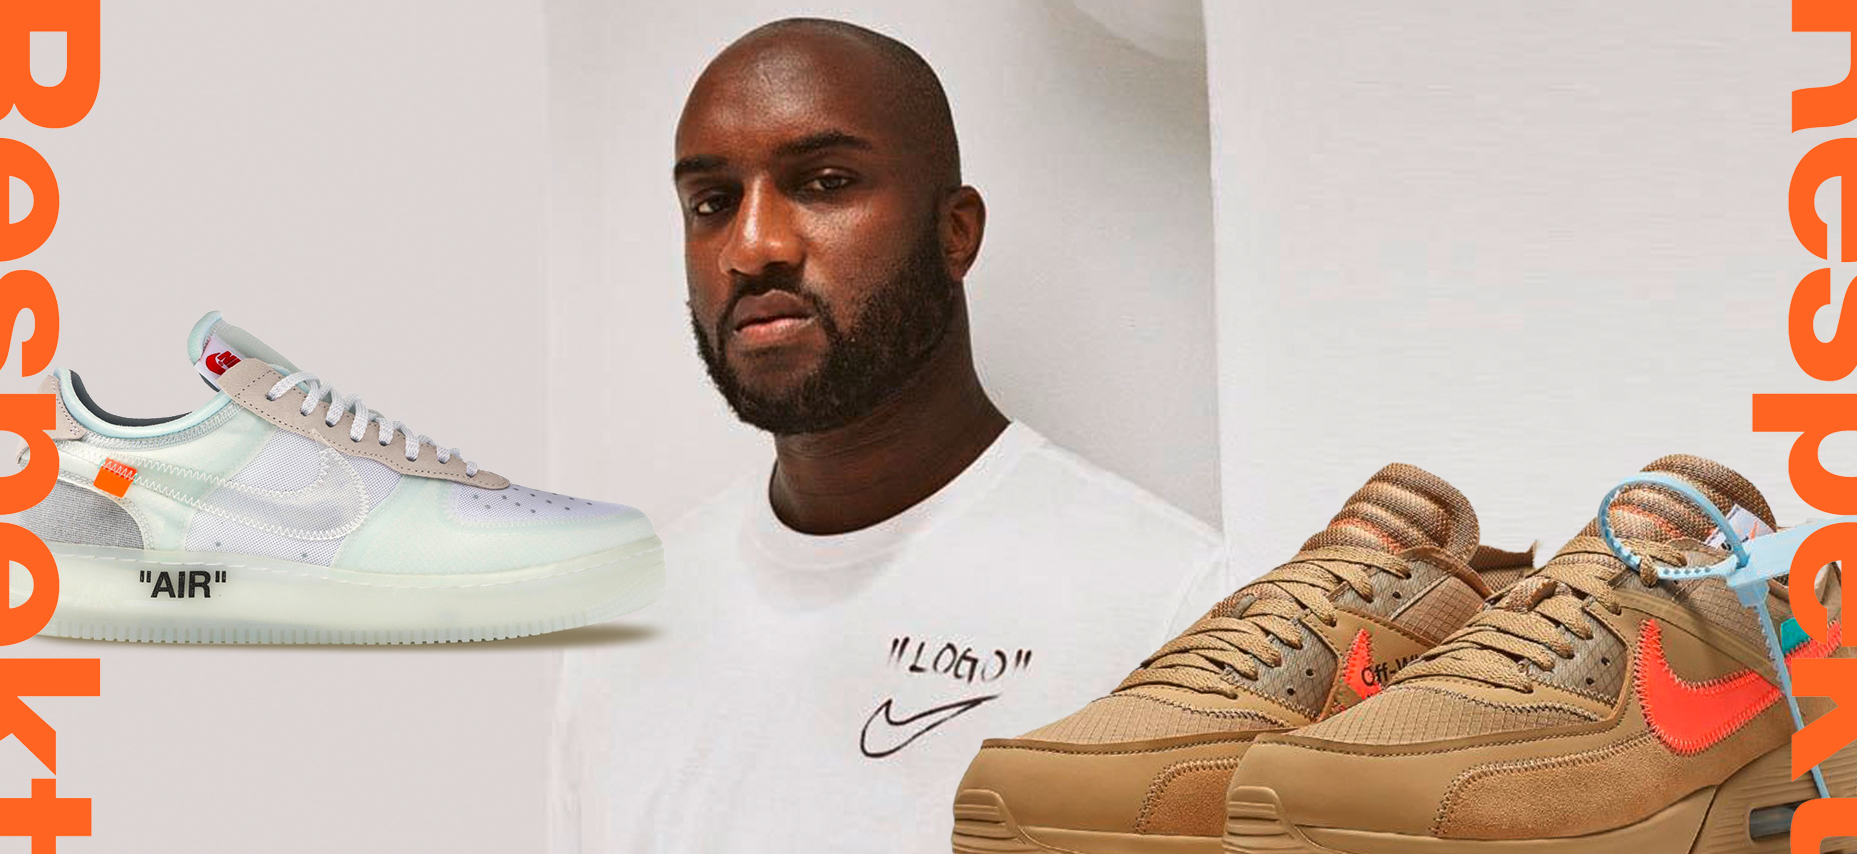 Virgil Abloh - From nowhere to Nike and LV 1